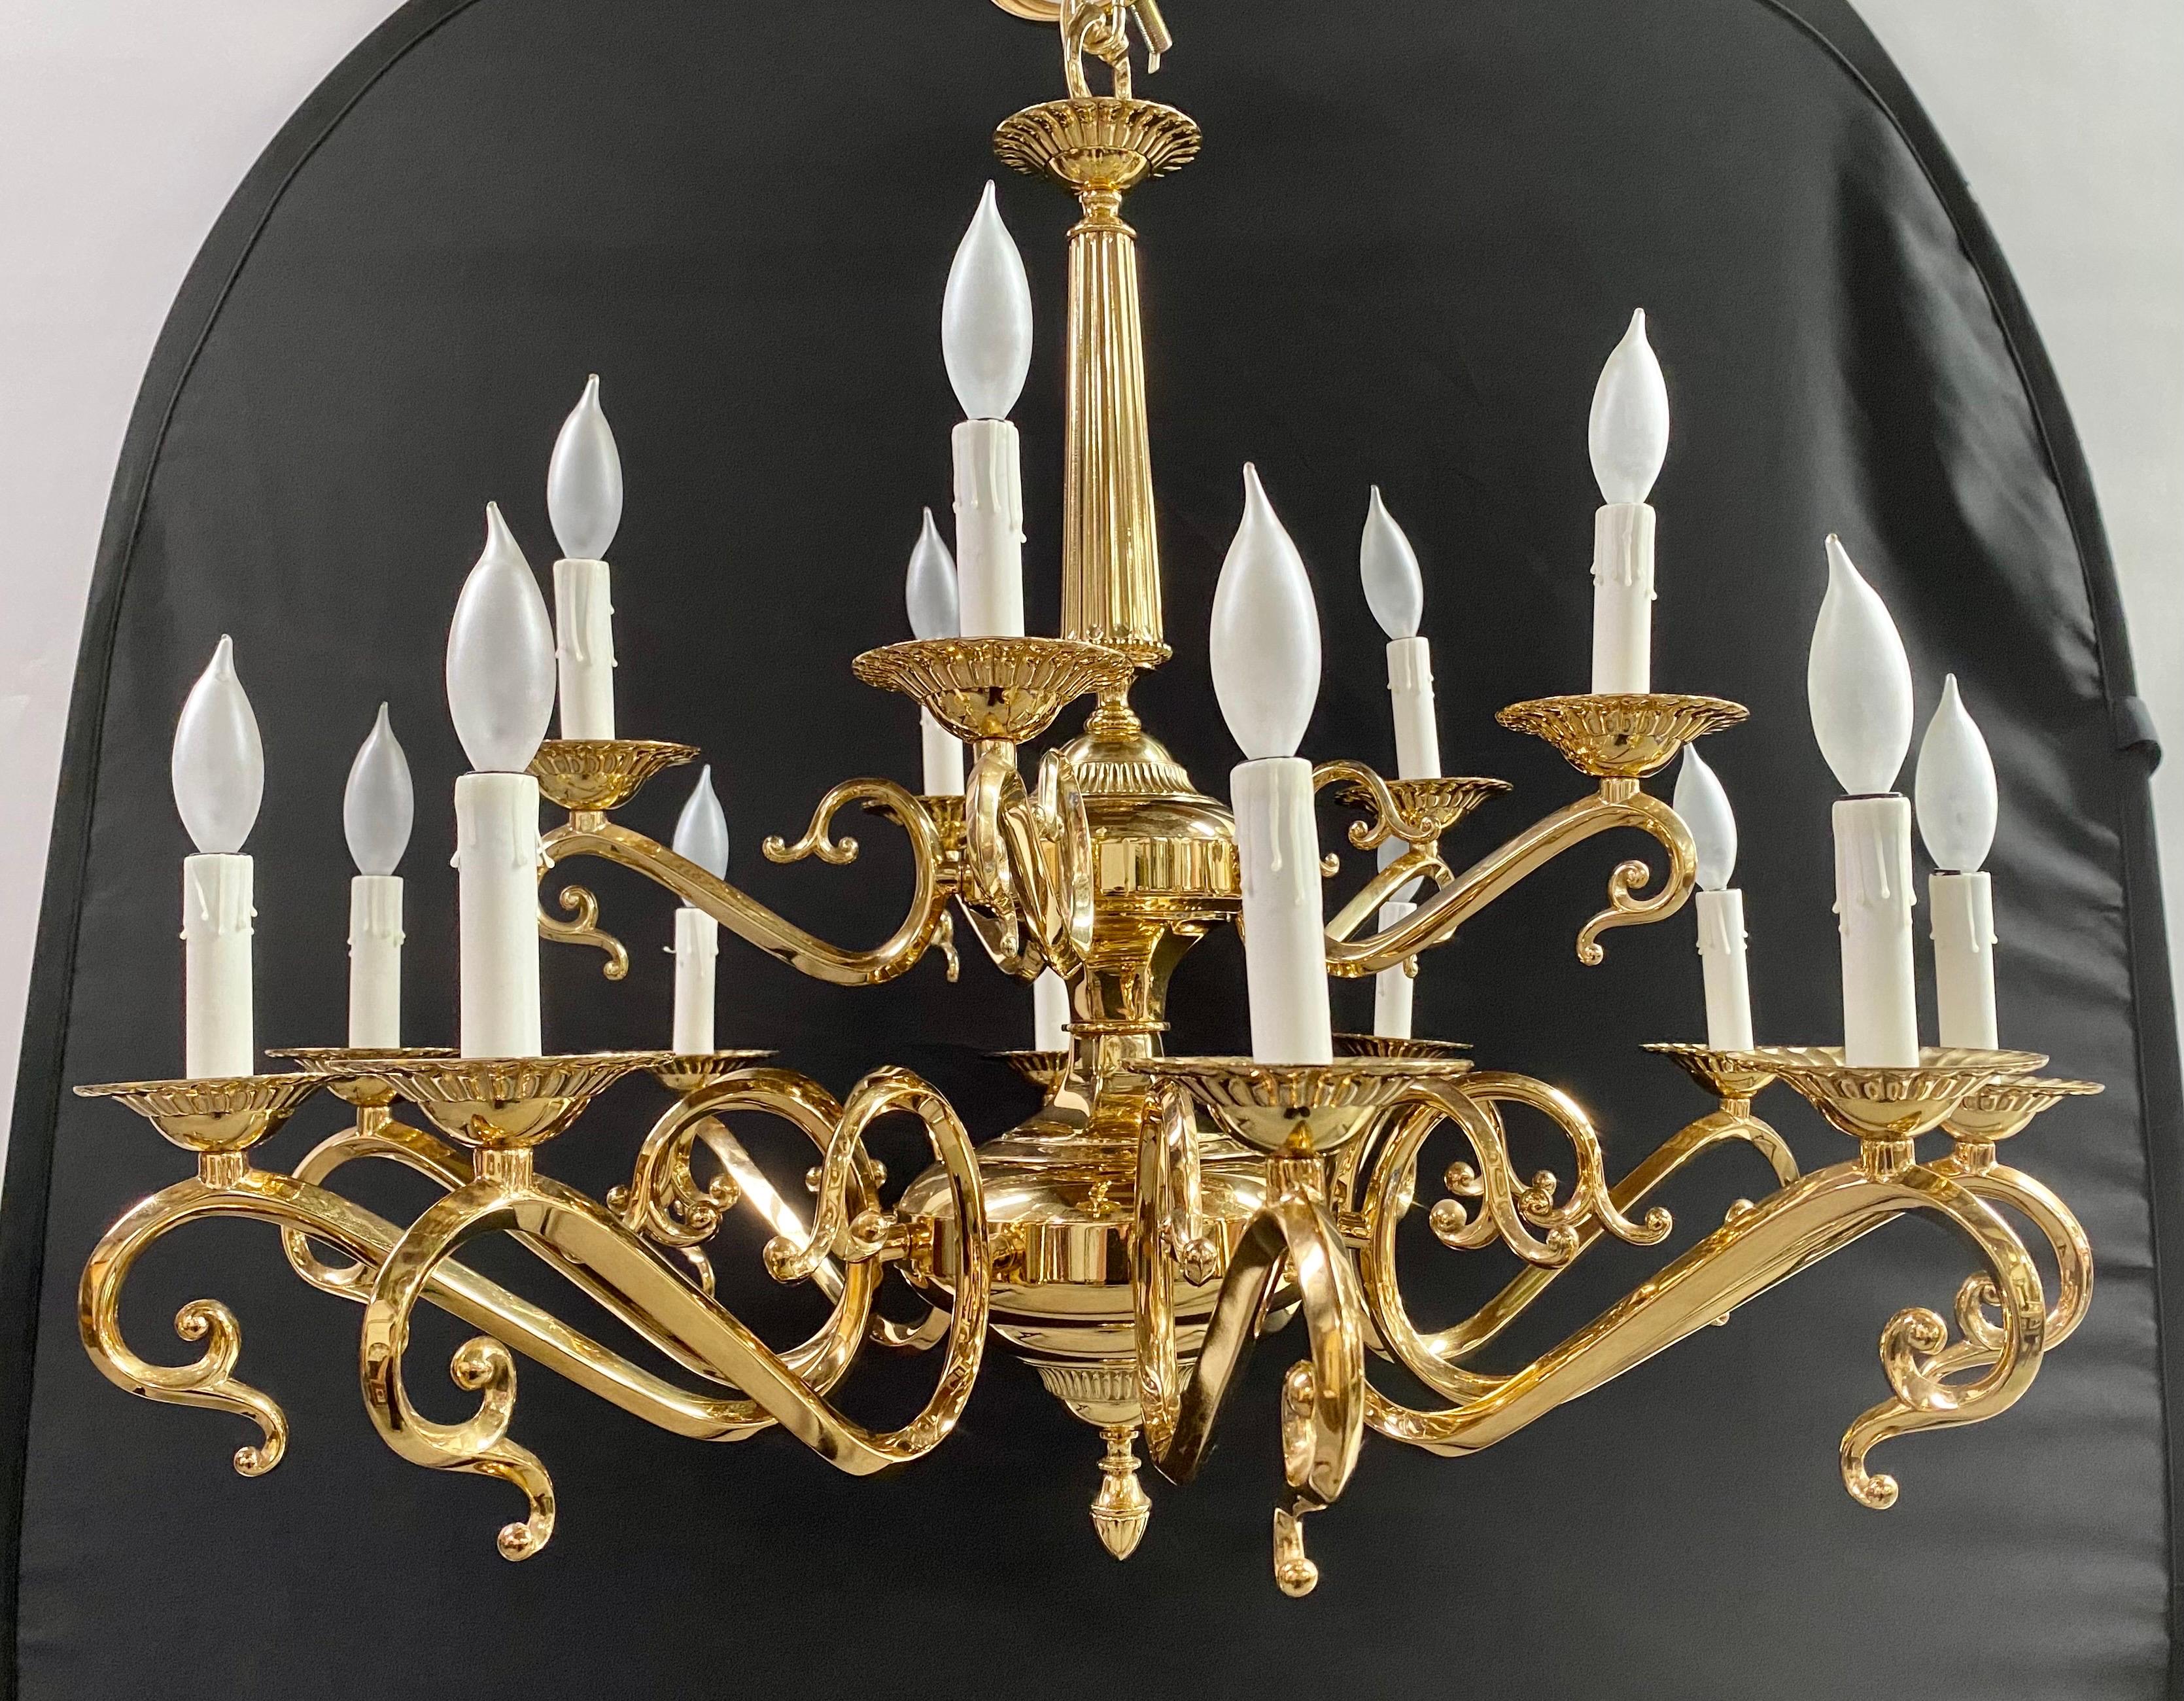 An majestic English Victorian-style brass chandelier, resplendent with fifteen gracefully articulated arms. The chandelier's central stem, an embodiment of structural and aesthetic integrity, commences its ascent with a fluted cylindrical